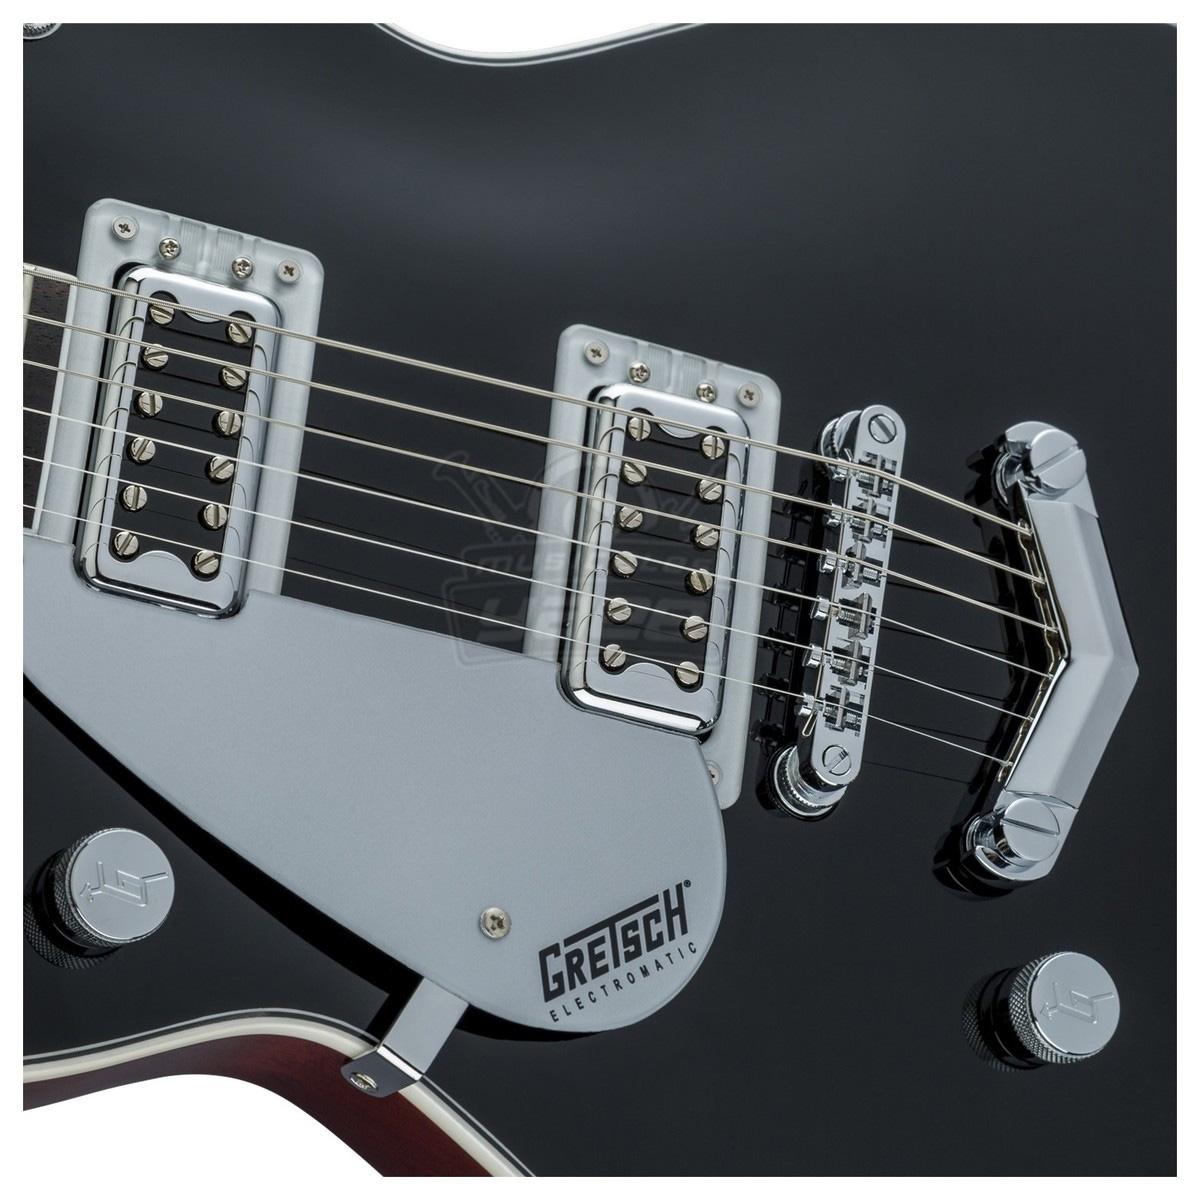 GUITARRA GRETSCH G5230LH ELECTROMATIC JET FT SINGLE-CUT WITH V-STOPTAIL  LEFT-HANDED BLACK